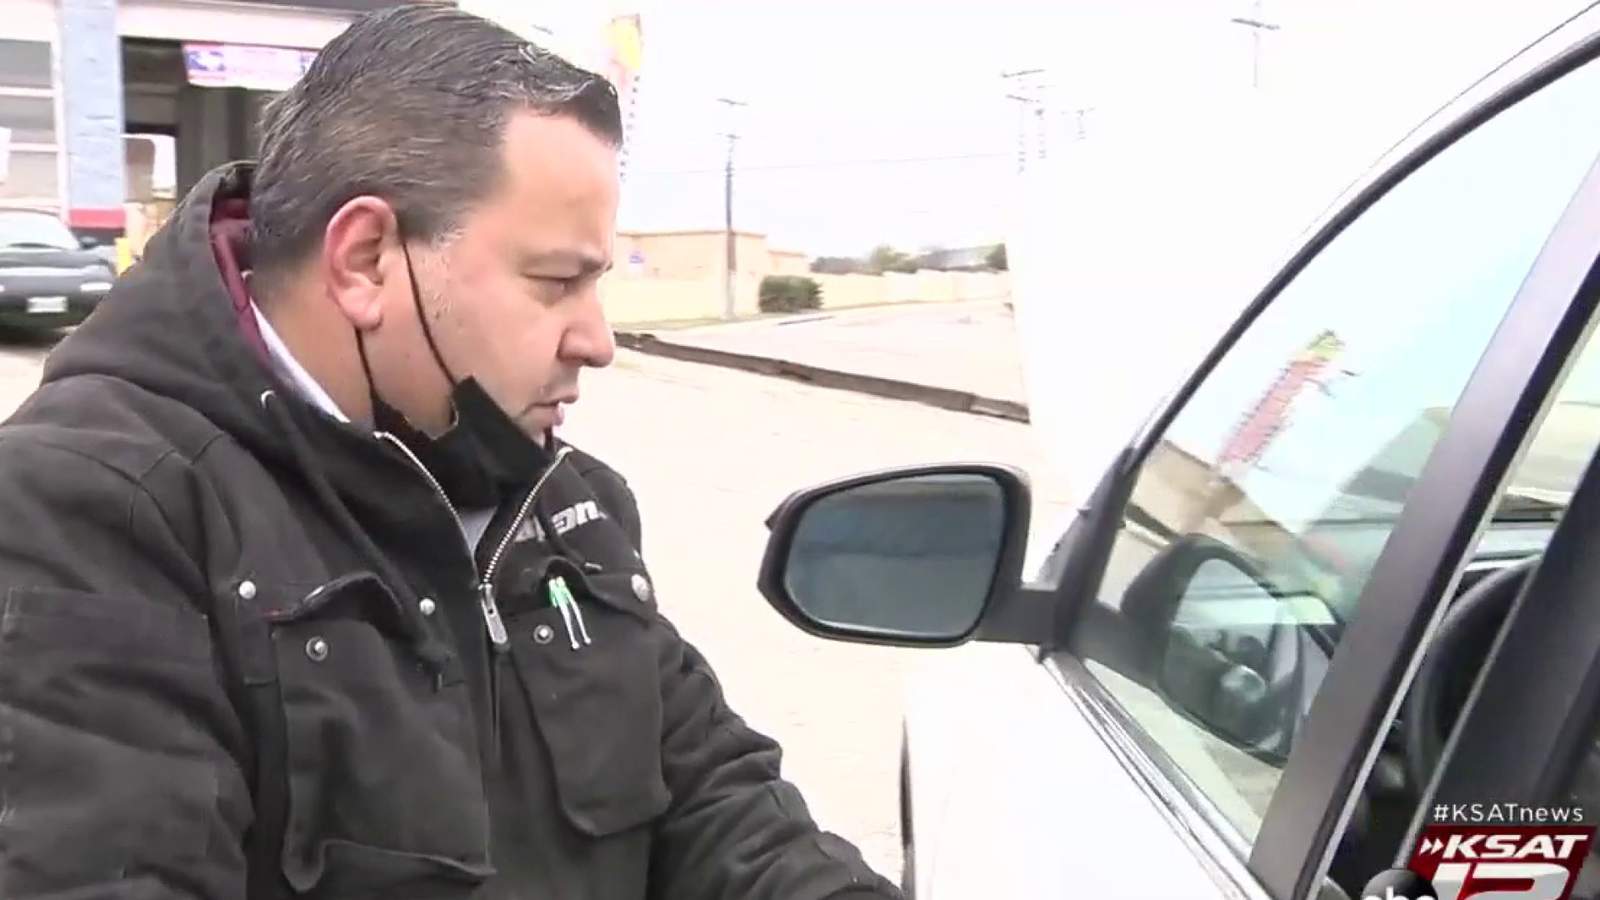 Mechanic offers drivers cold weather tips as temperatures drop